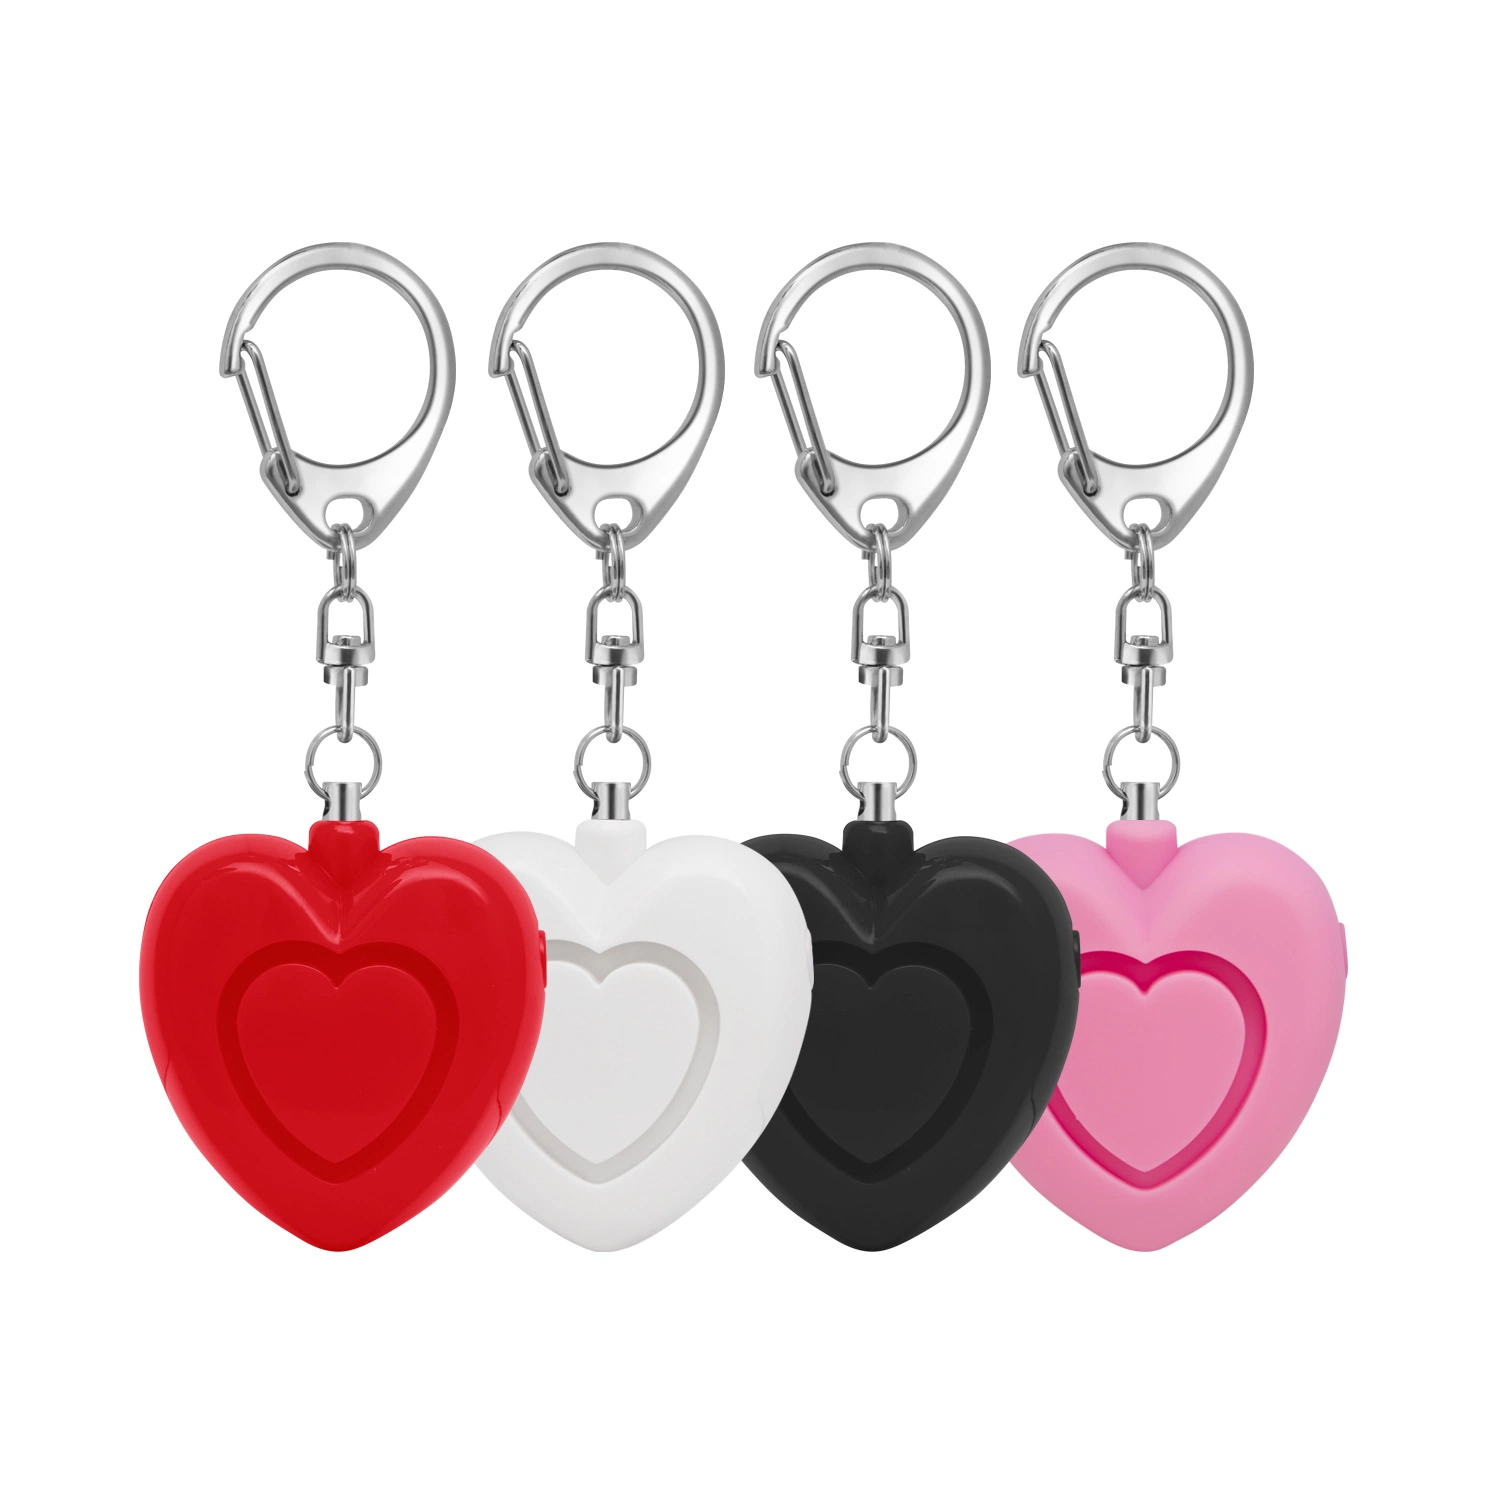 Self Defense Safety Device for Child Personal Heart Shape Alarm